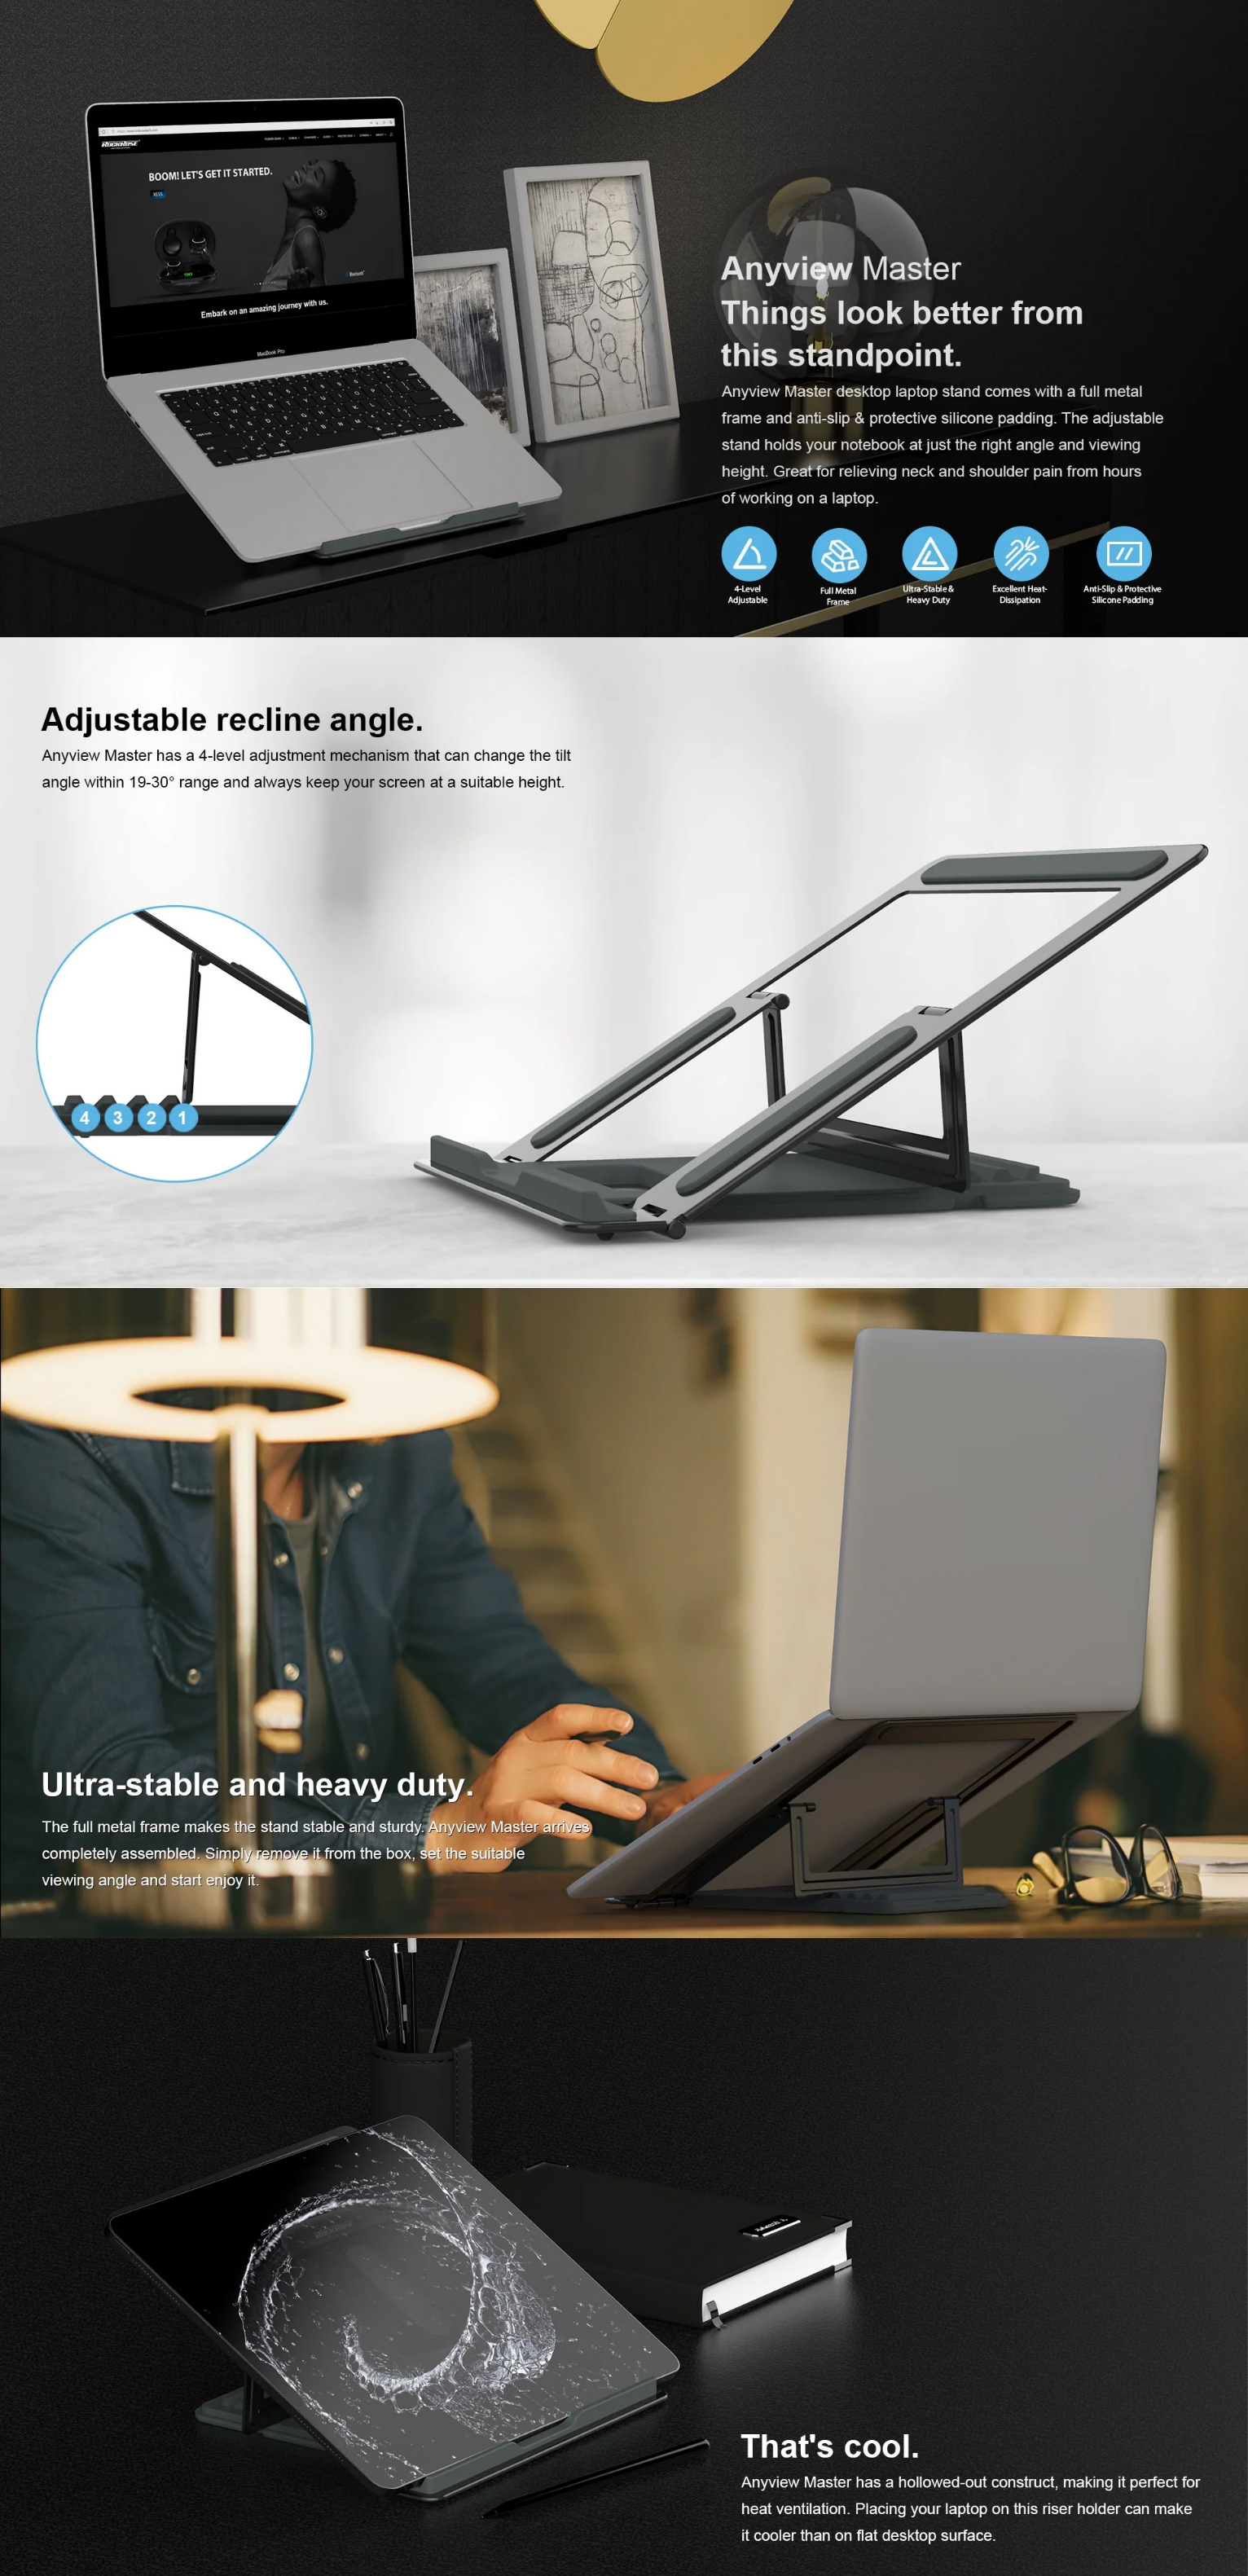 Laptop-Accessories-RockRose-Anyview-Master-Fully-Foldable-Ergonomic-4-Level-Adjustable-Metal-Laptop-Stand-1